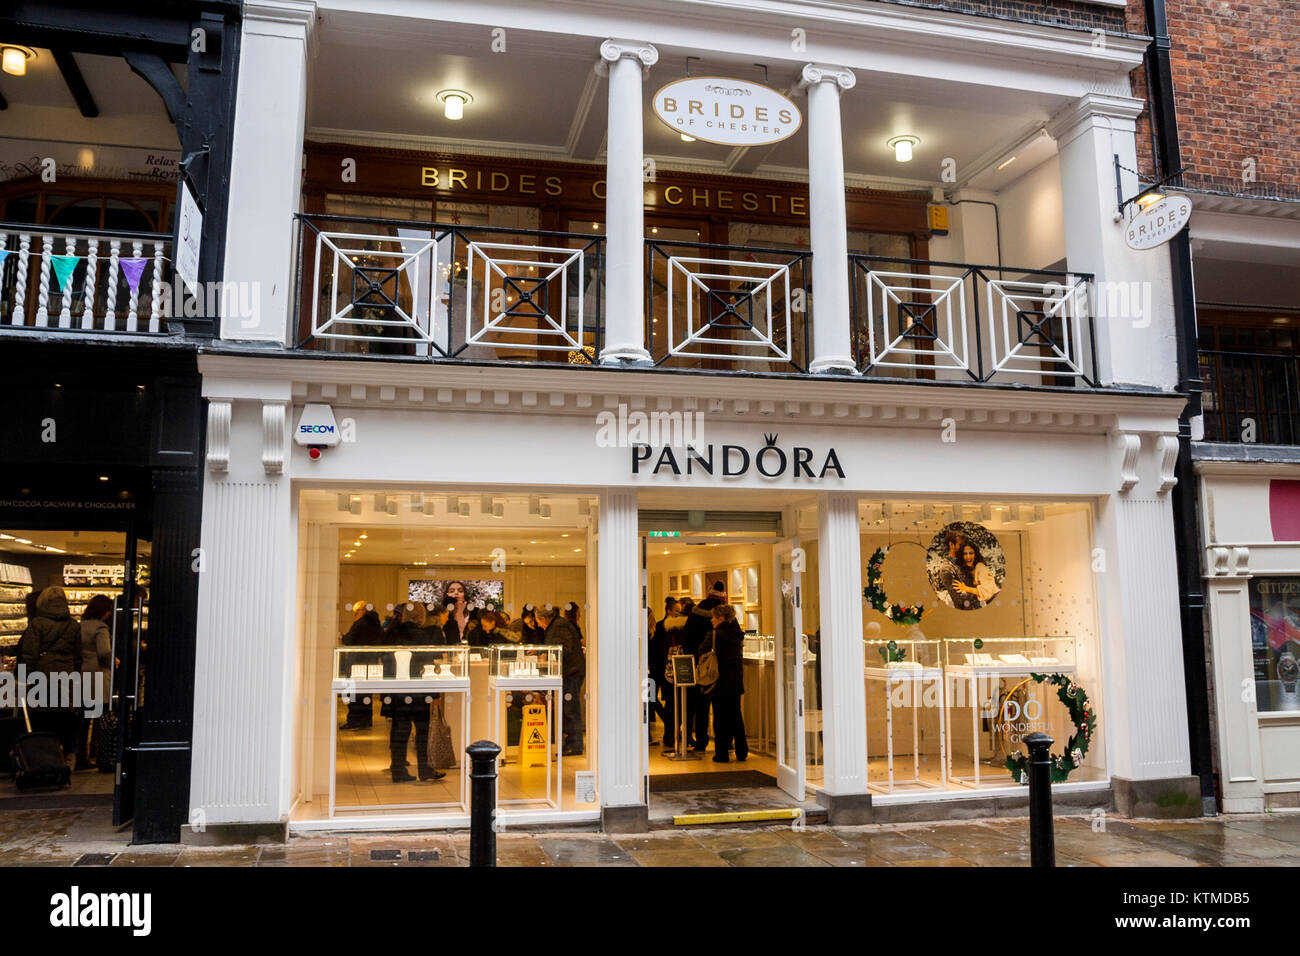 Pandora Shop Front High Resolution Stock Photography and Images - Alamy